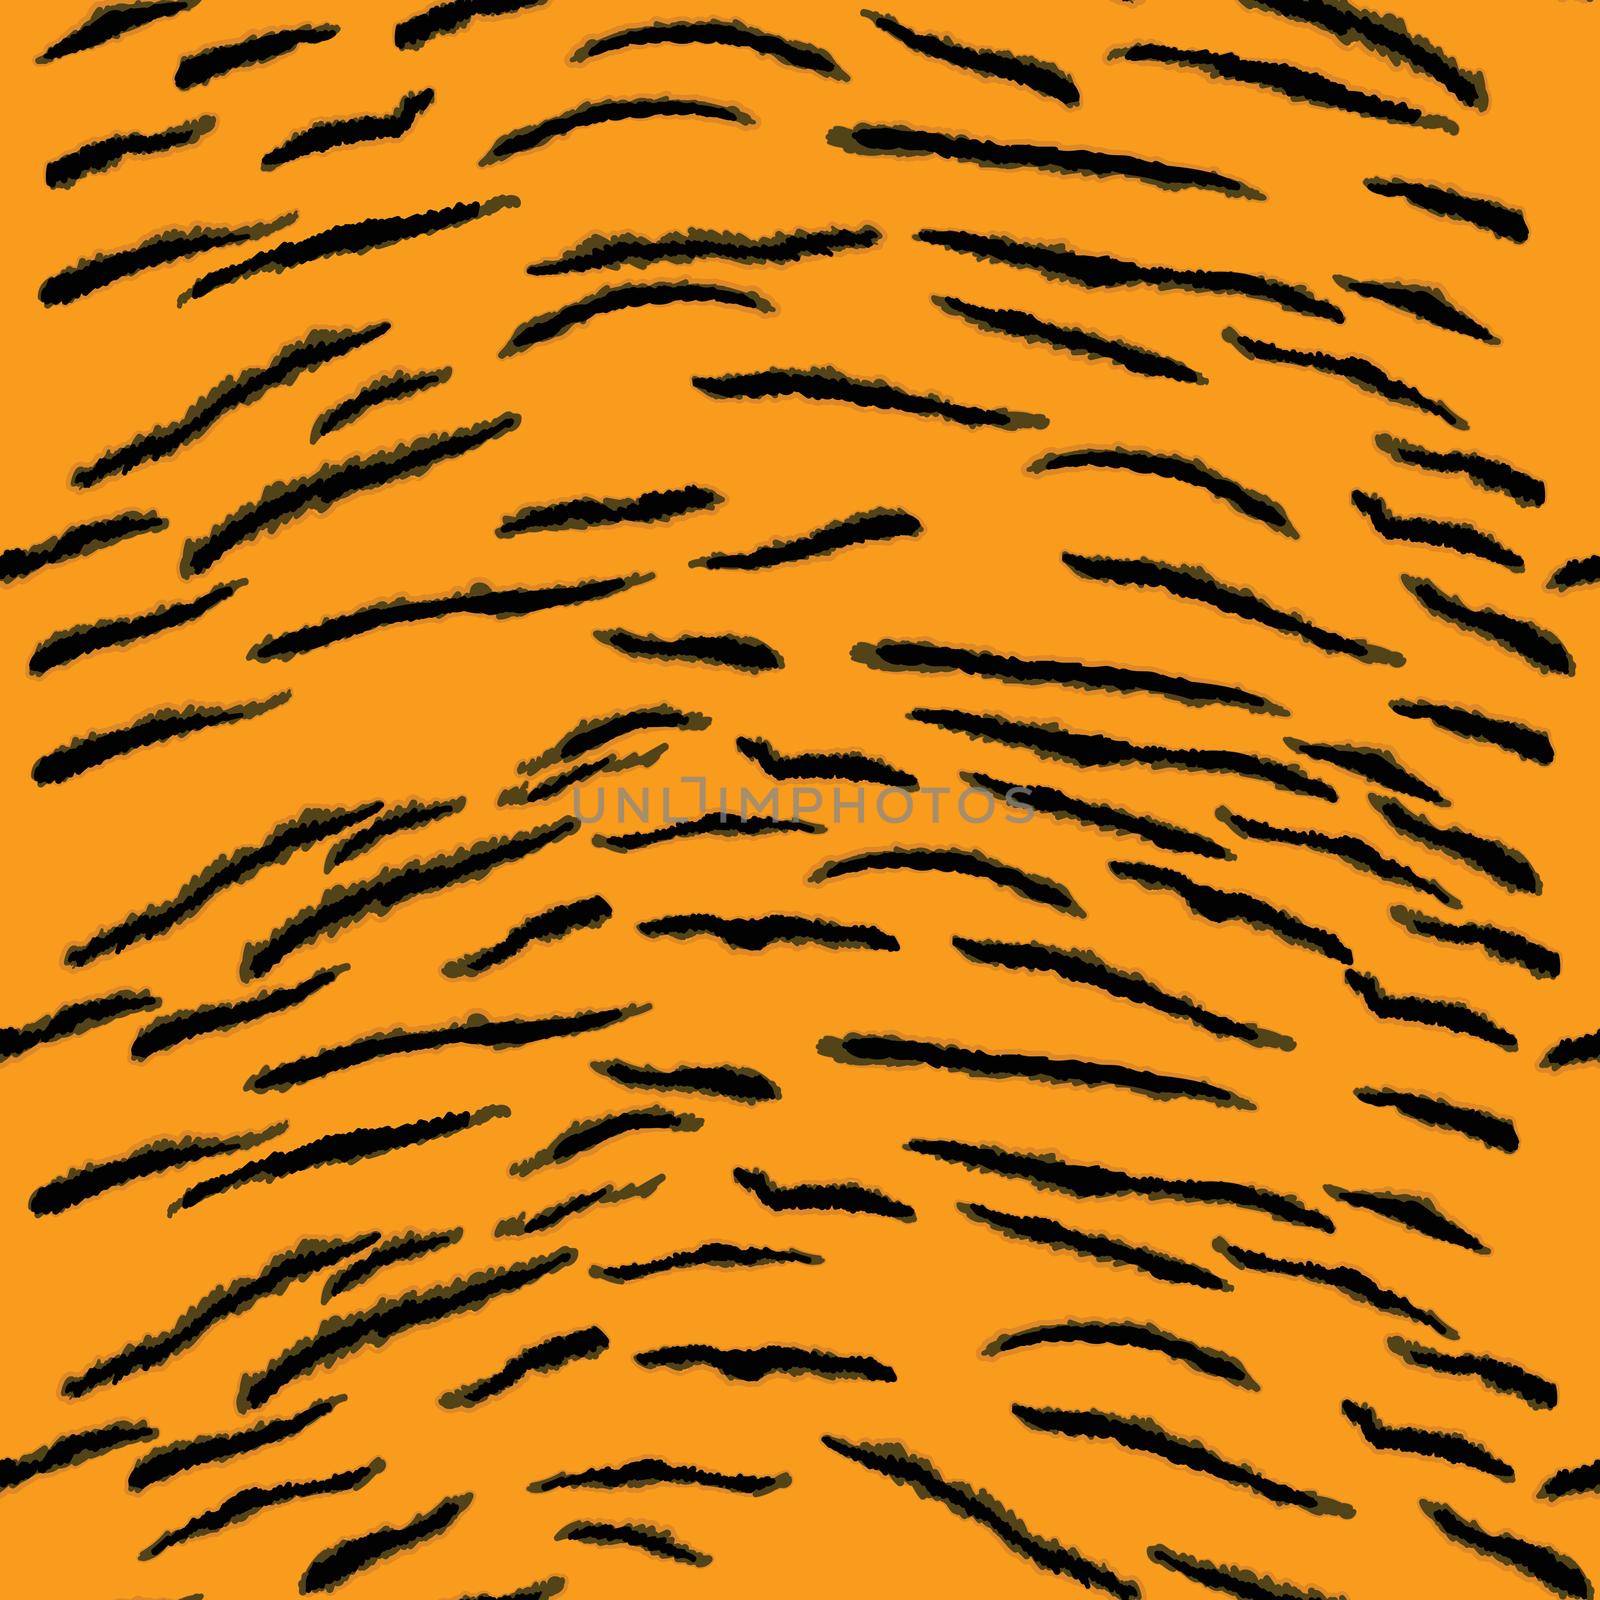 Abstract modern tiger seamless pattern. Animals trendy background. Orange and black decorative vector stock illustration for print, card, postcard, fabric, textile. Modern ornament of stylized skin.